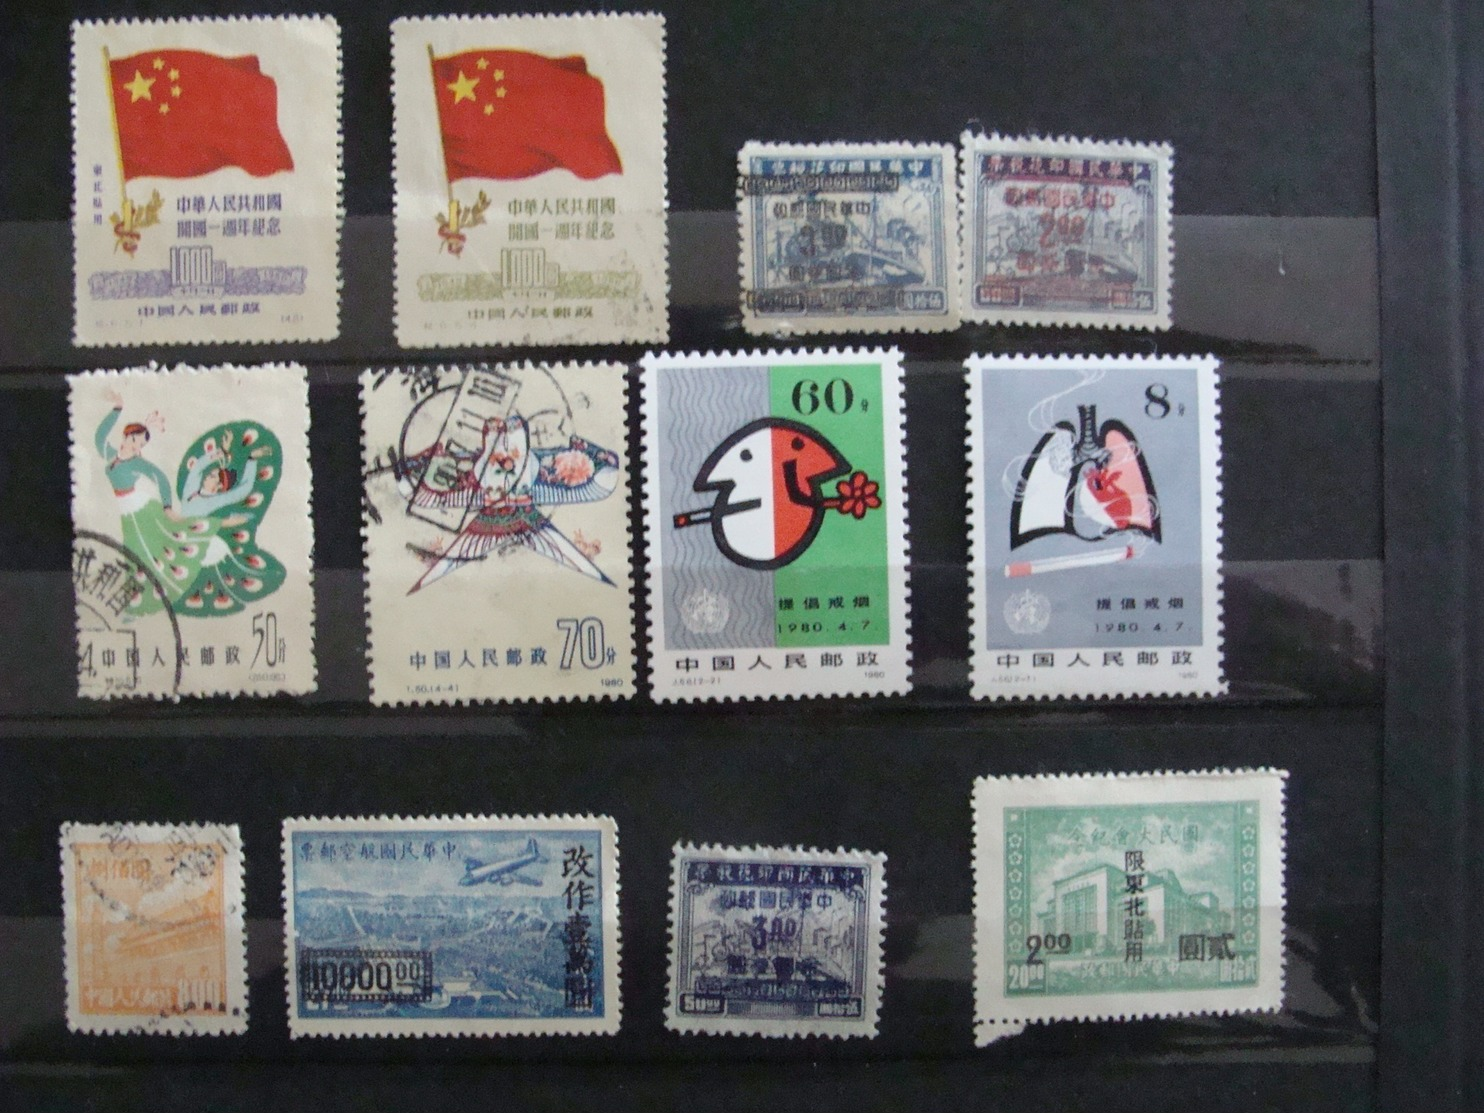 LOT CHINE CHINA 320 TIMBRES ANNEES 1910 A 1970 SUR PLANCHES AVEC PHOTOS